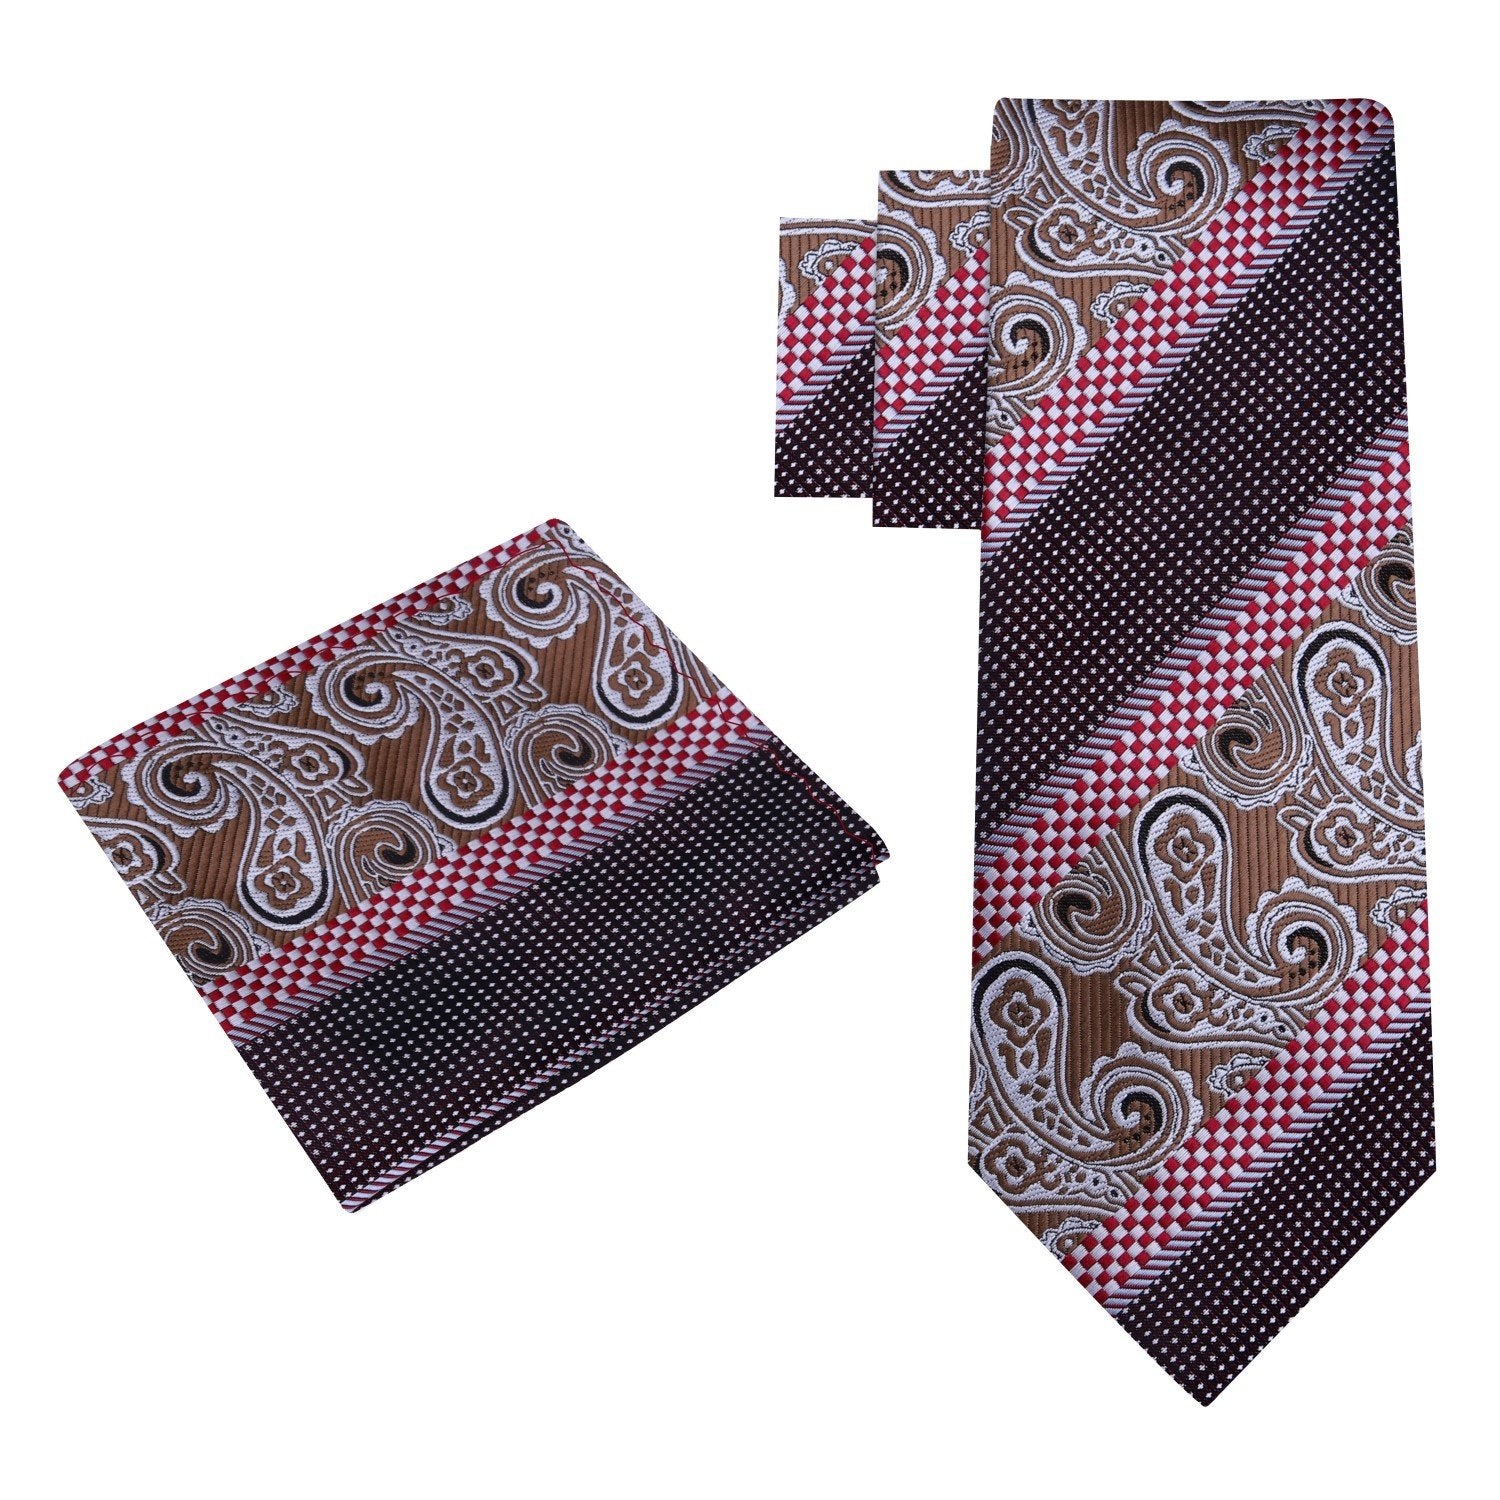 Alt View: Brown, Red Paisley and Check Tie and Pocket Square